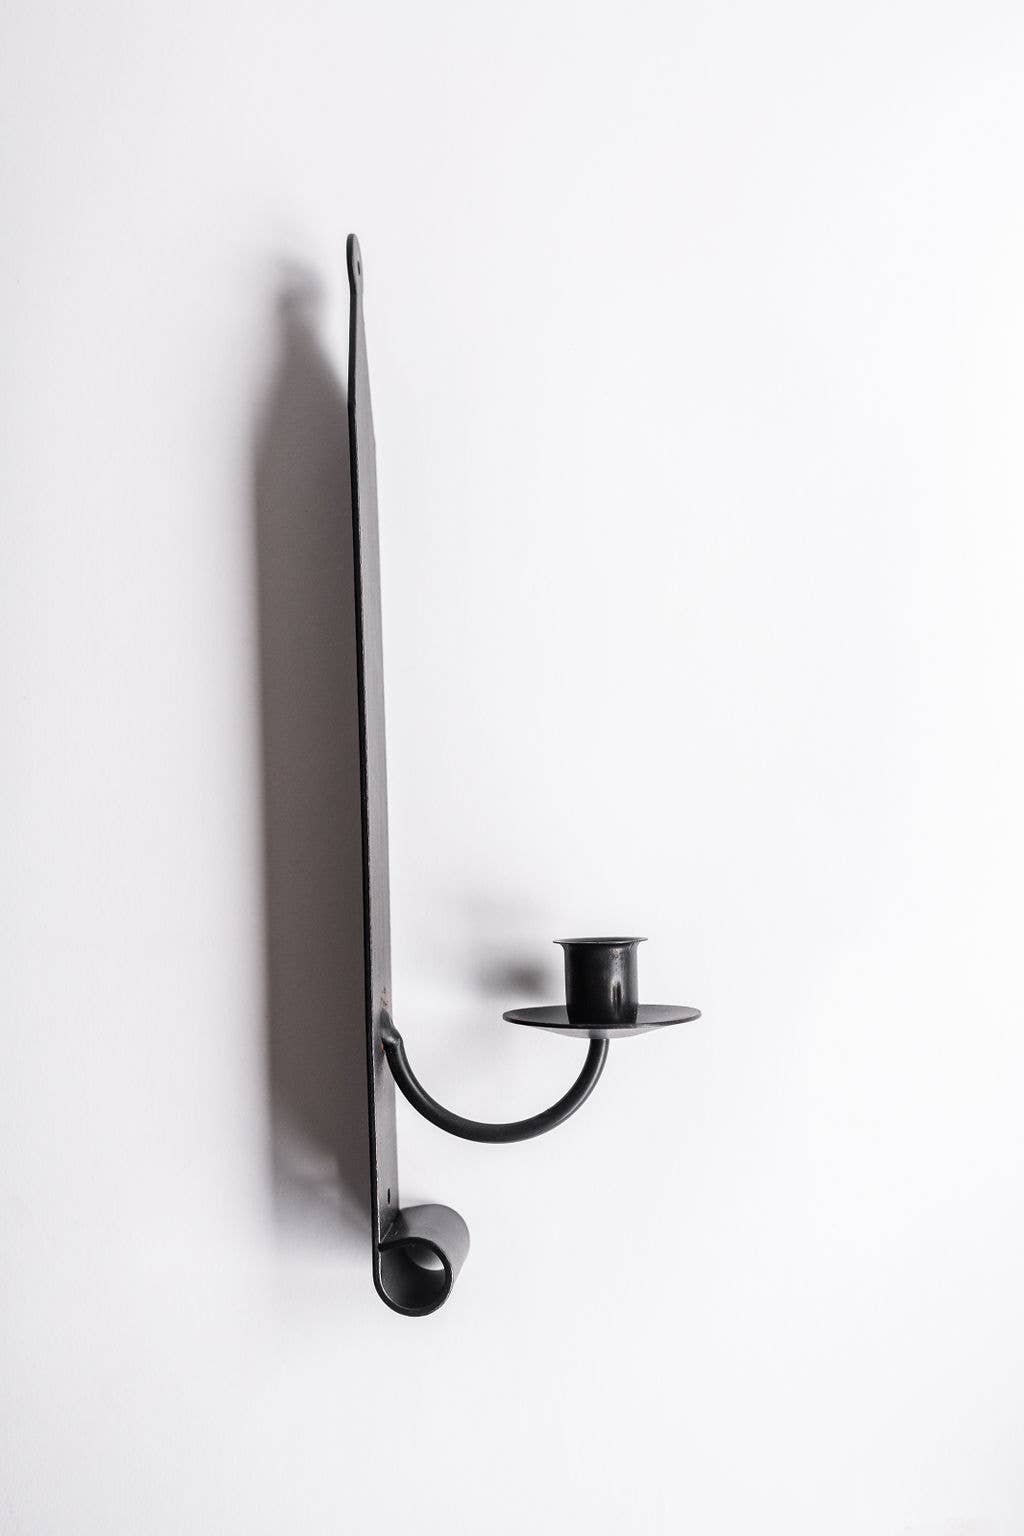 The Metal Sconce by Millstream Home